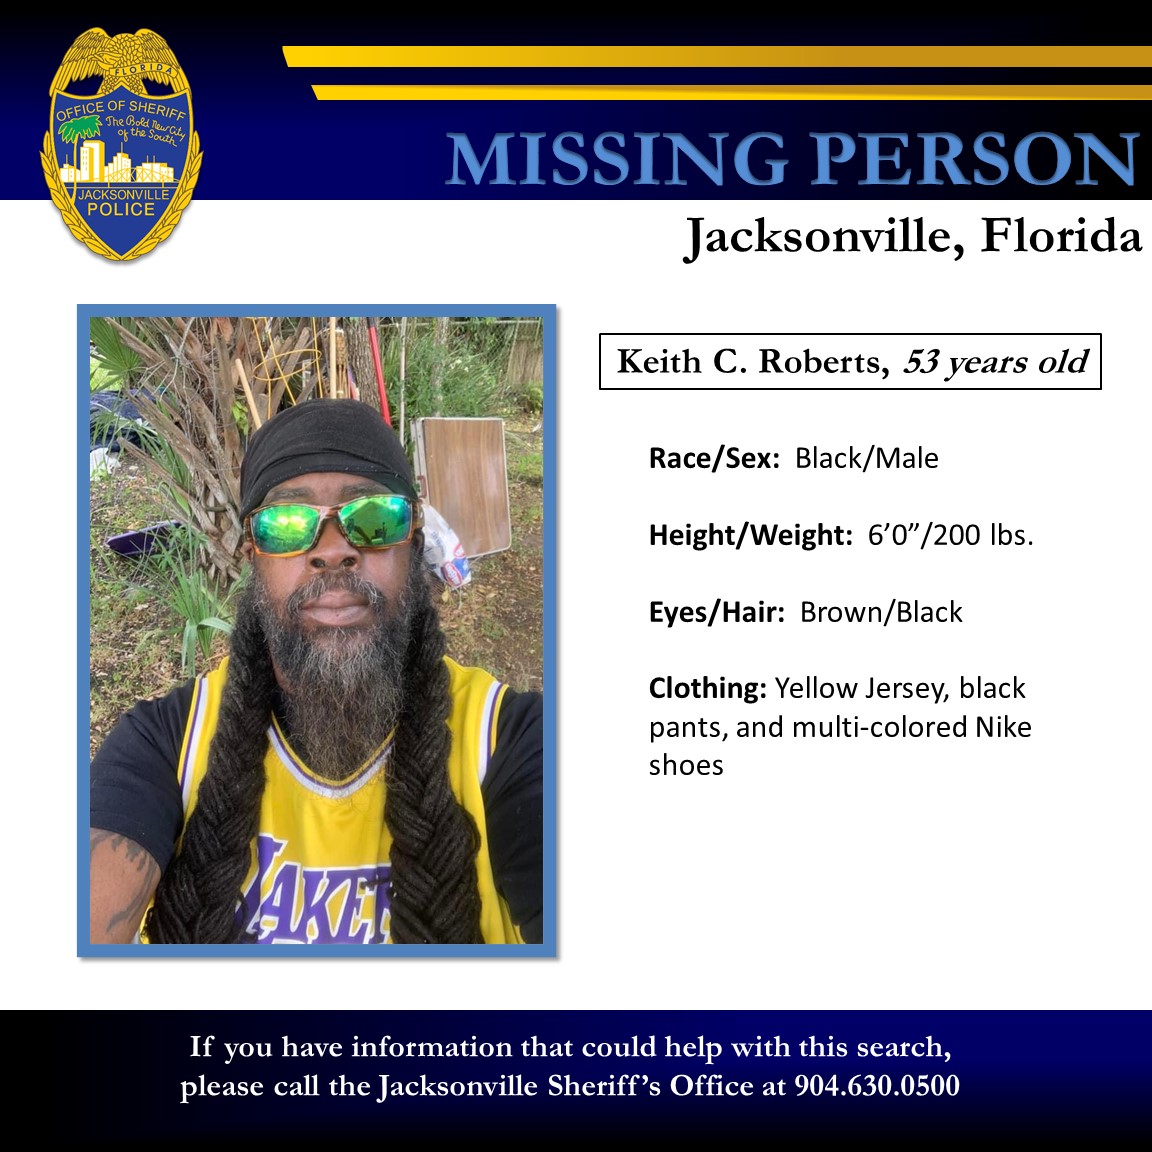 Missing Endangered Adult The Jacksonville Sheriff’s Office is currently searching for 53-year-old Keith Roberts in the Arlington area of town. Mr. Roberts was reported missing by family members after failing to return to his residence. Mr. Roberts was last seen in the area of